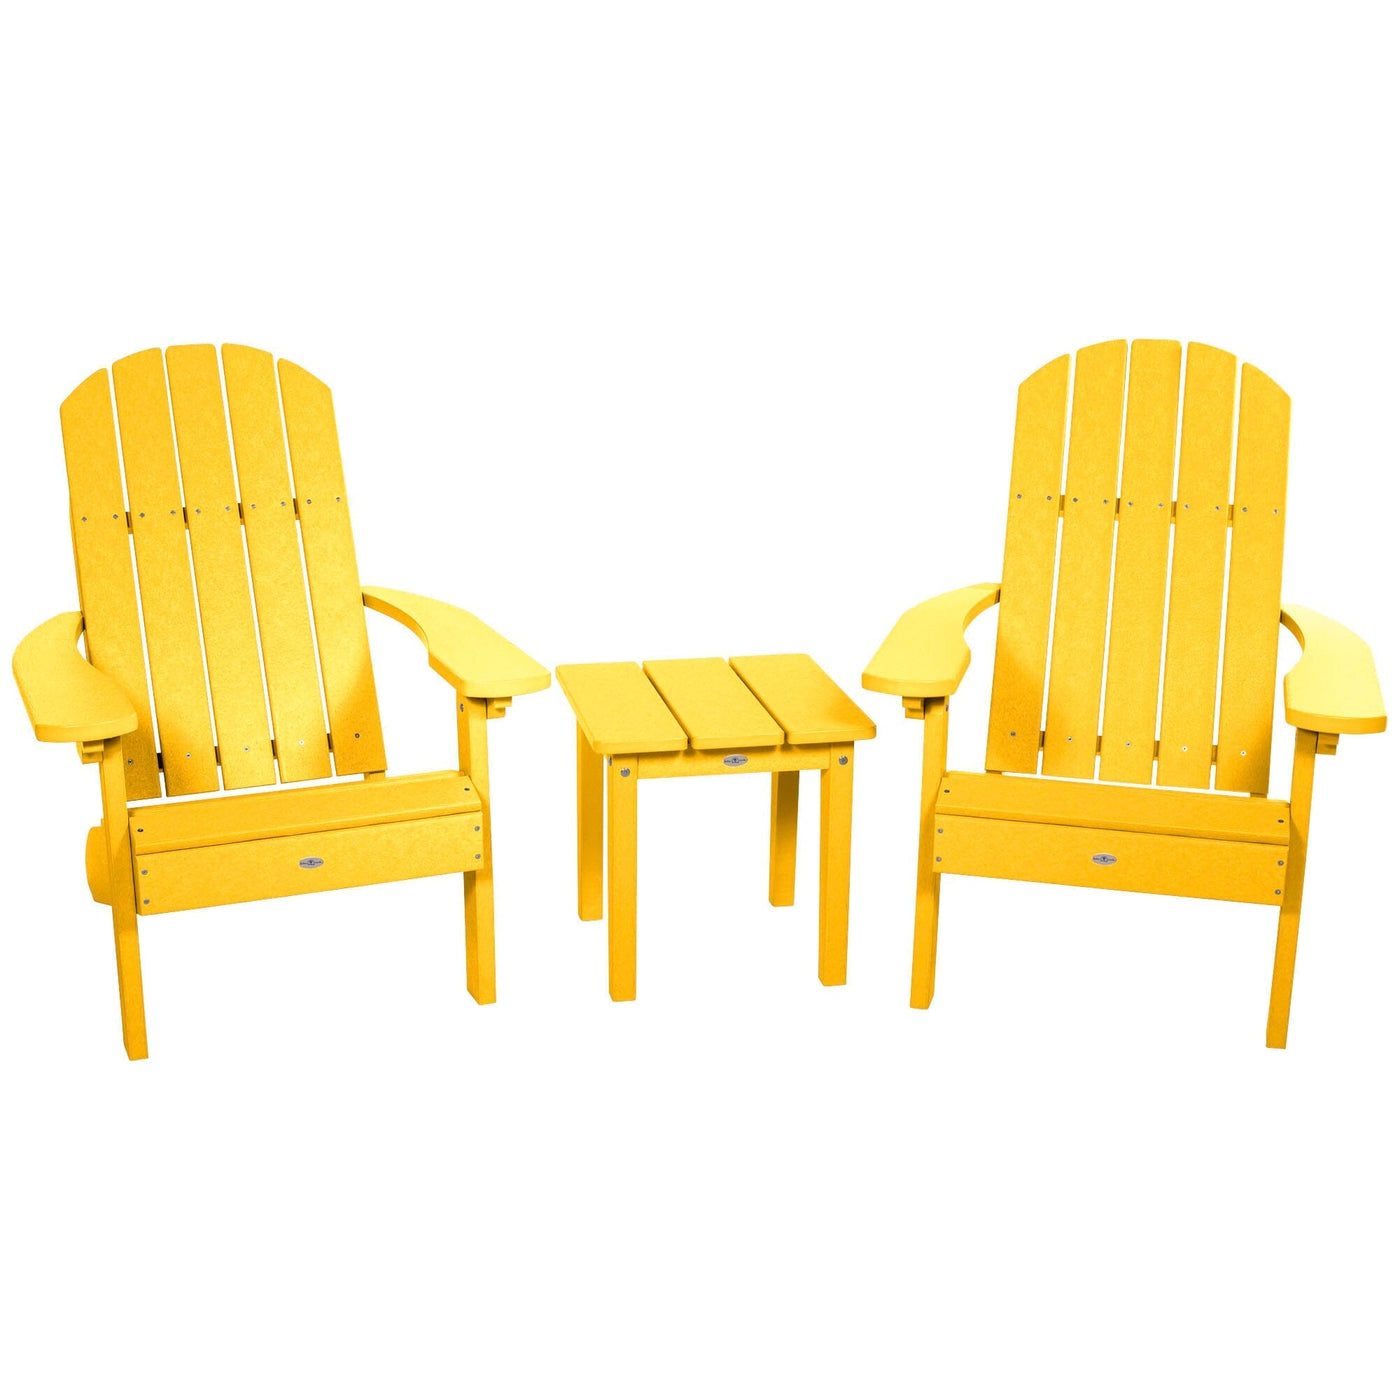 Two Cape Classic Adirondack Chairs and Side Table Set Kitted Set Bahia Verde Outdoors Sunbeam Yellow 